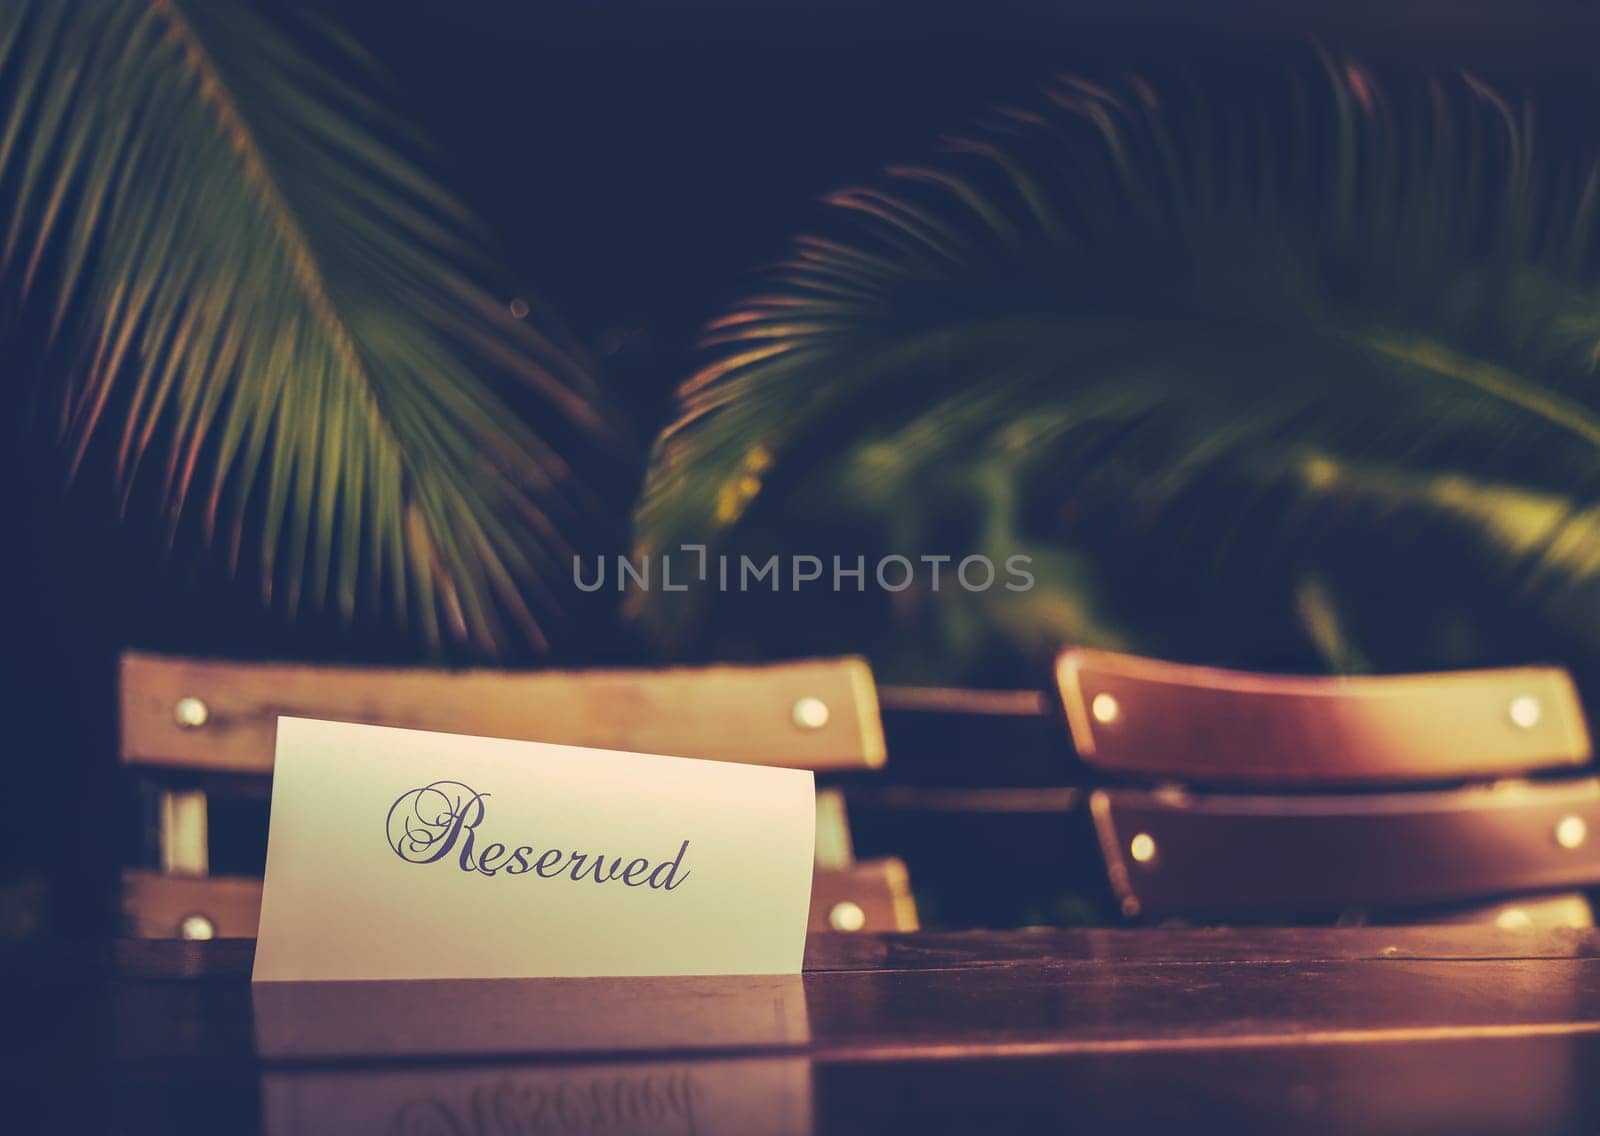 Reserved Table At A Tropical Resort Restaurant by mrdoomits